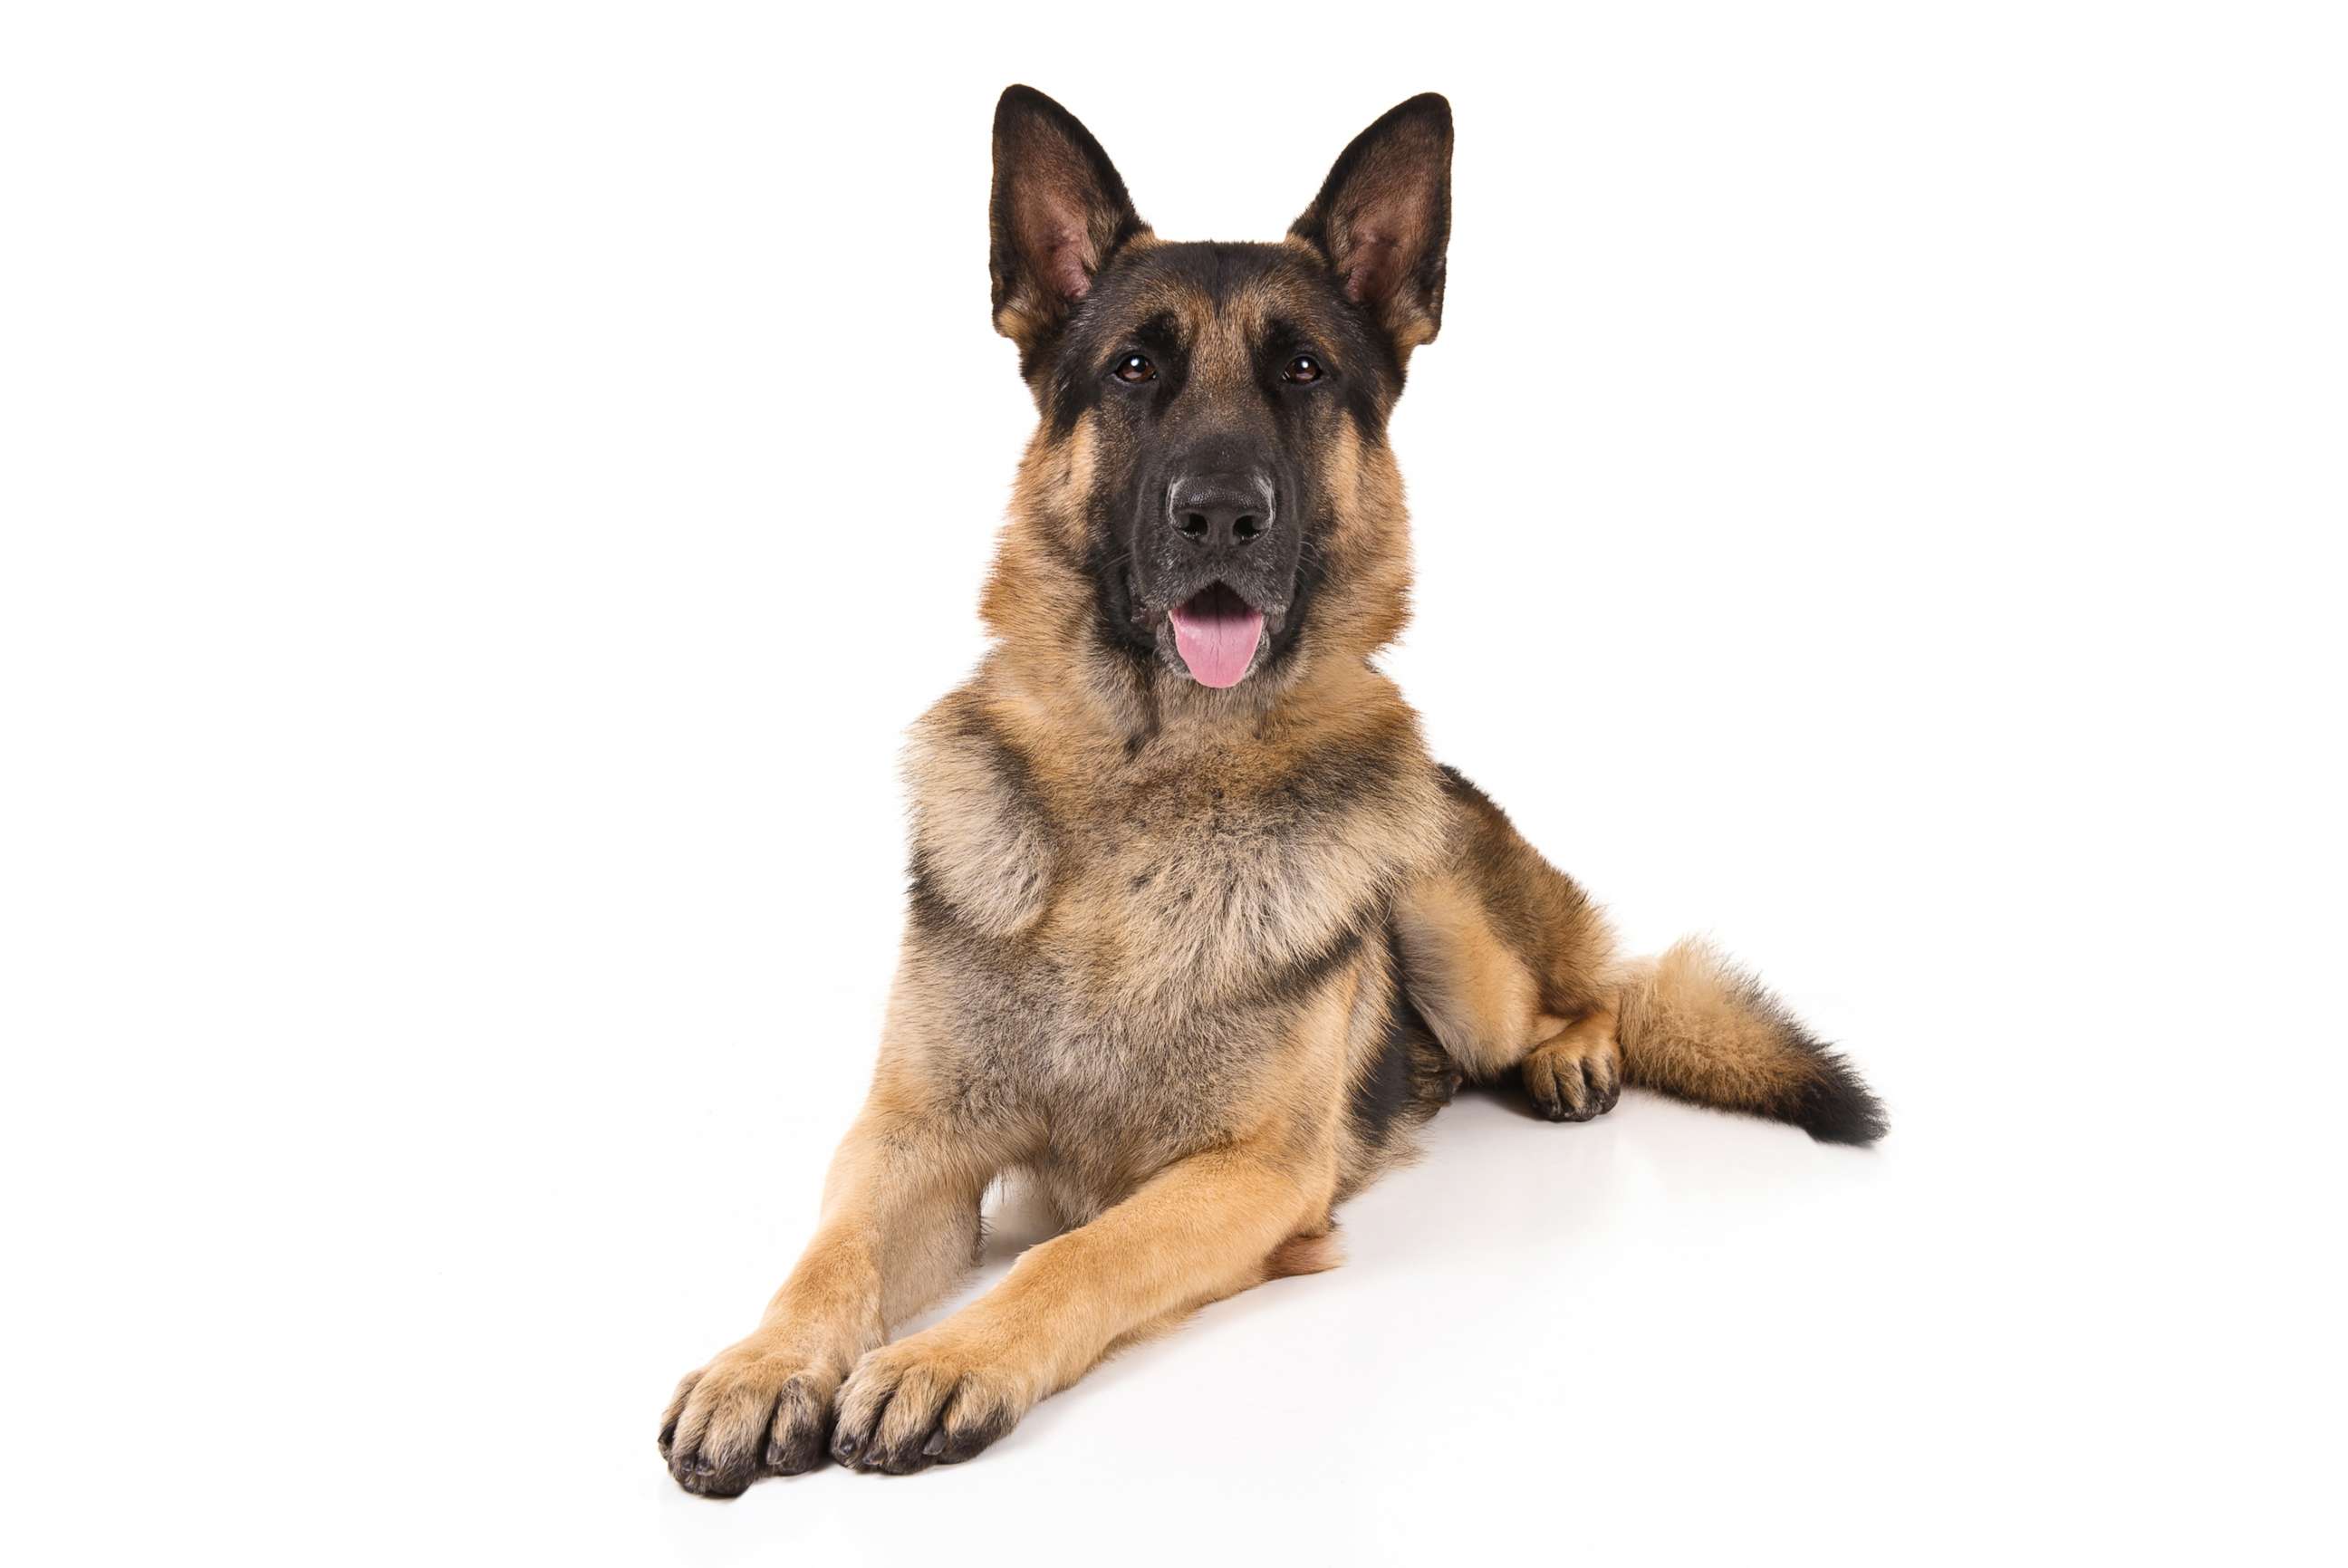 PHOTO: German shepherds are No. 2 on the AKC's most popular dog breeds of 2018.